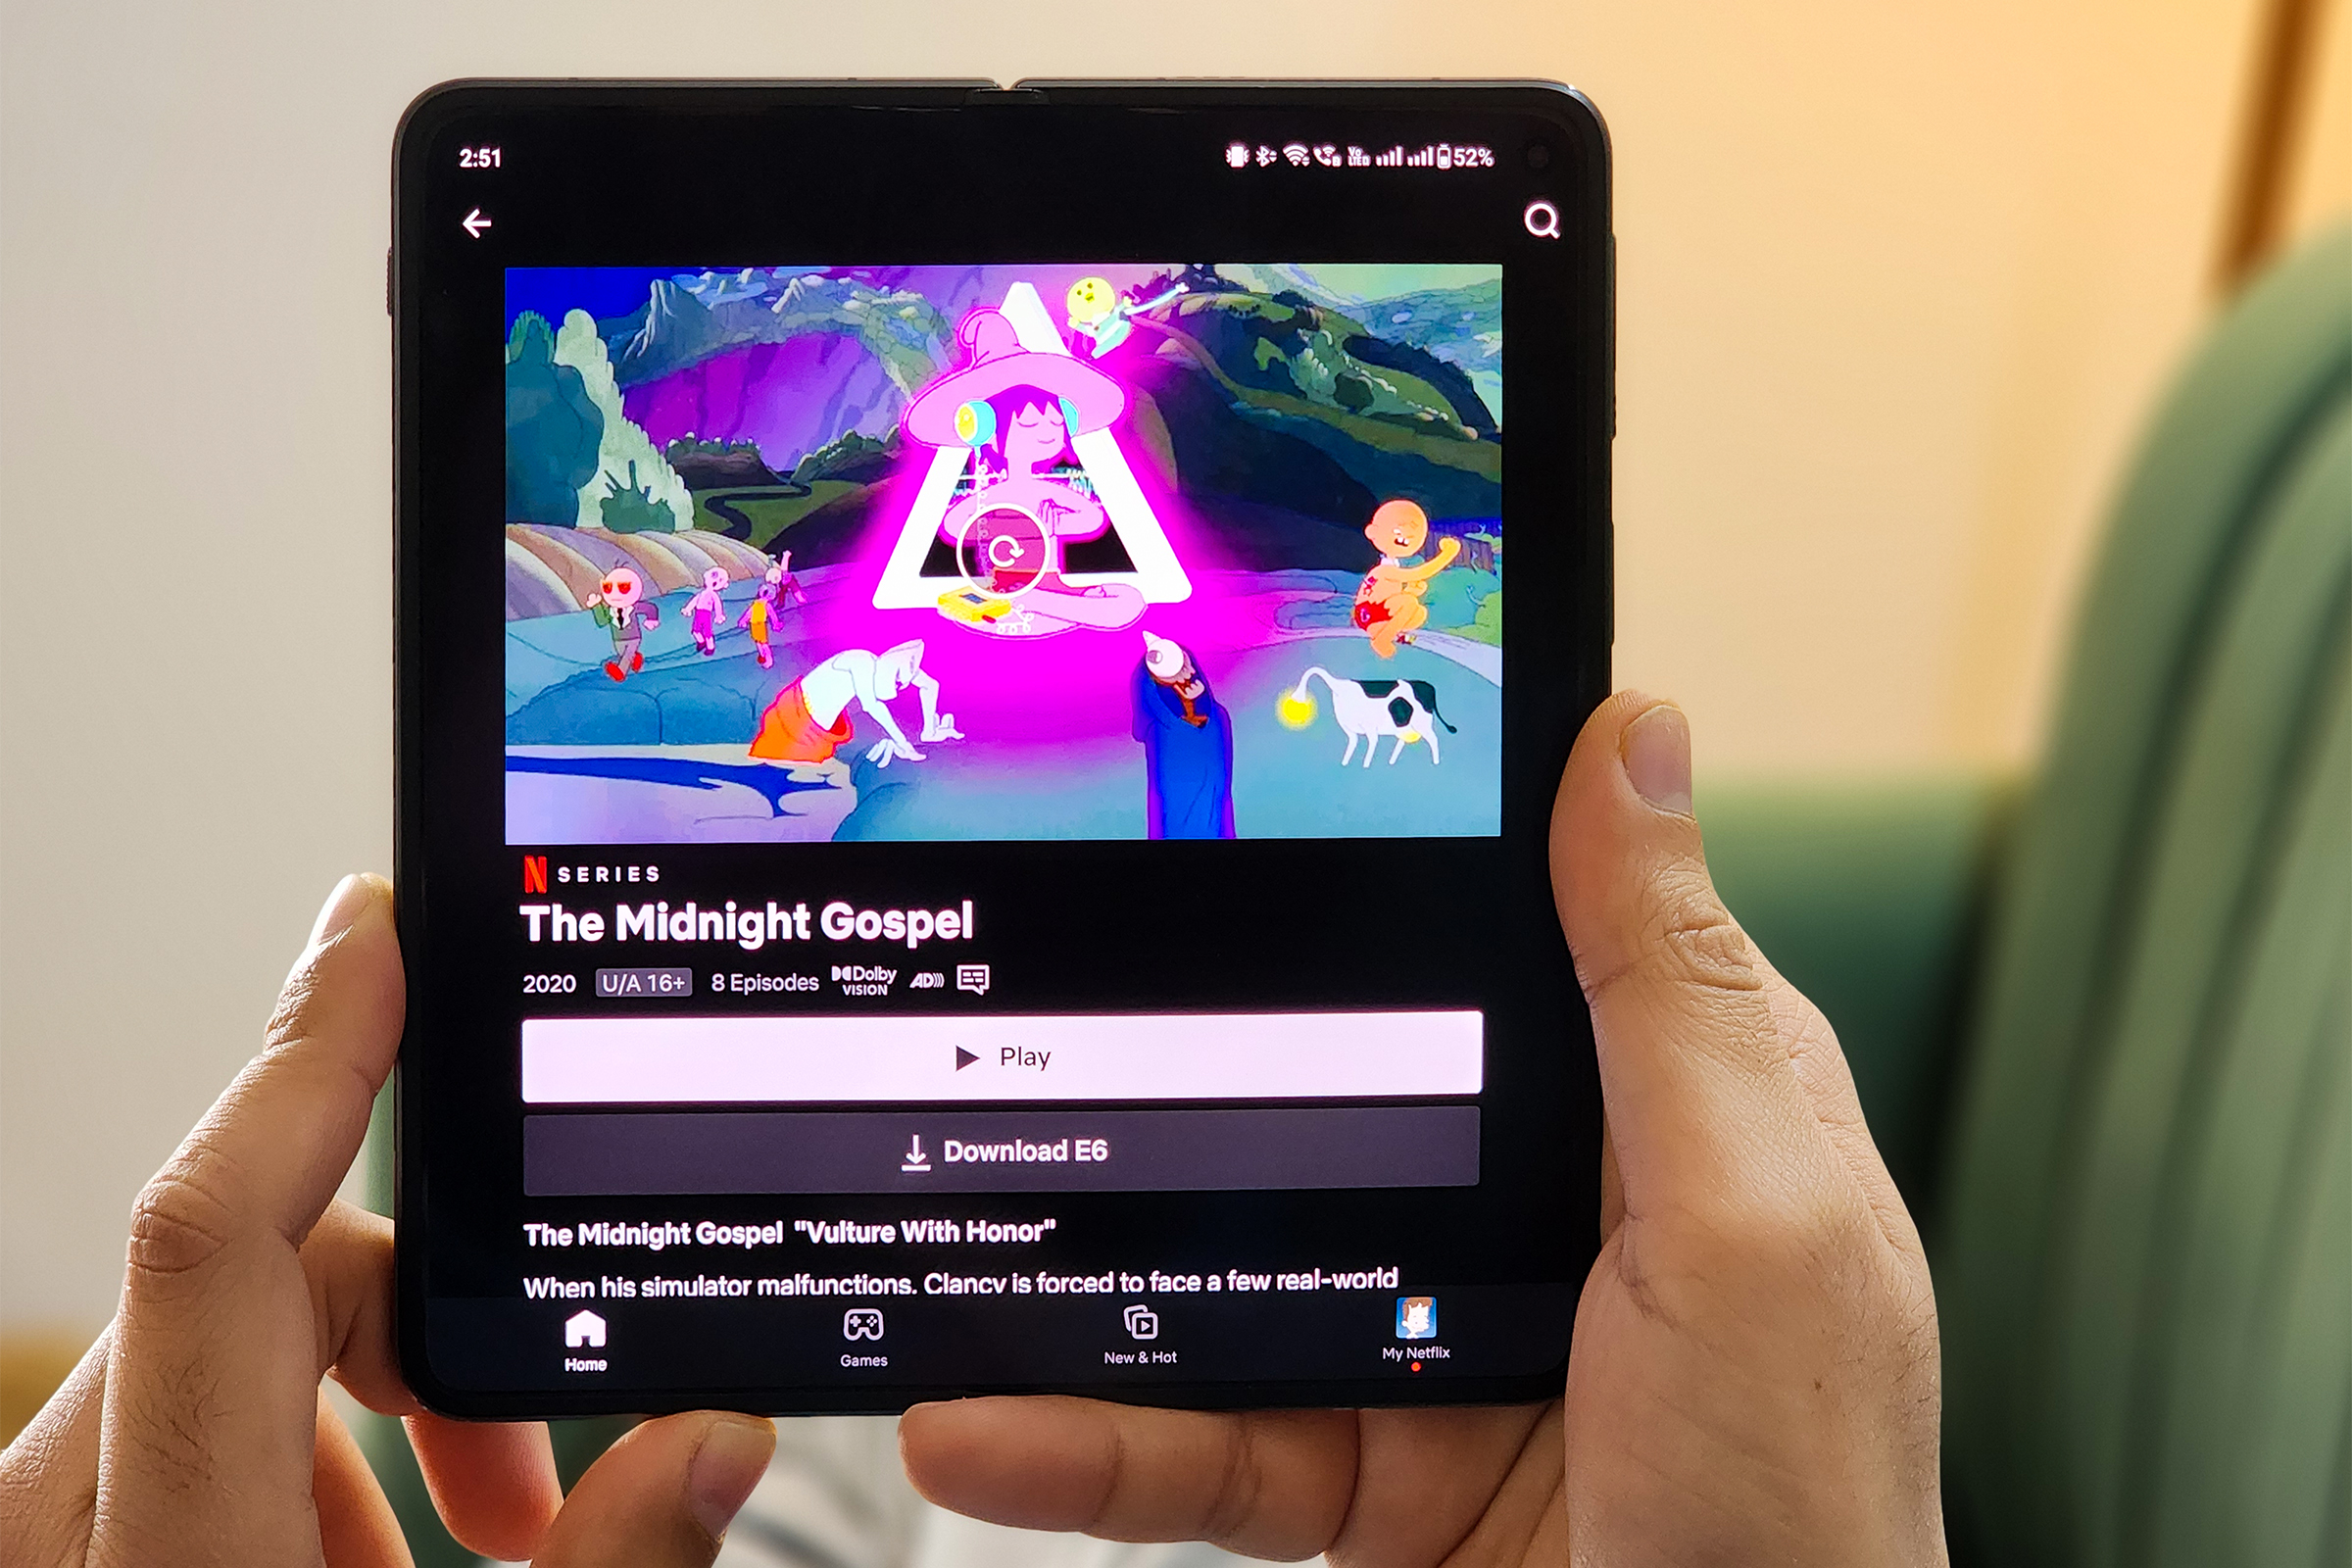 OnePlus Open with Dolby Vision support on Midnight Gospel Netflix series.